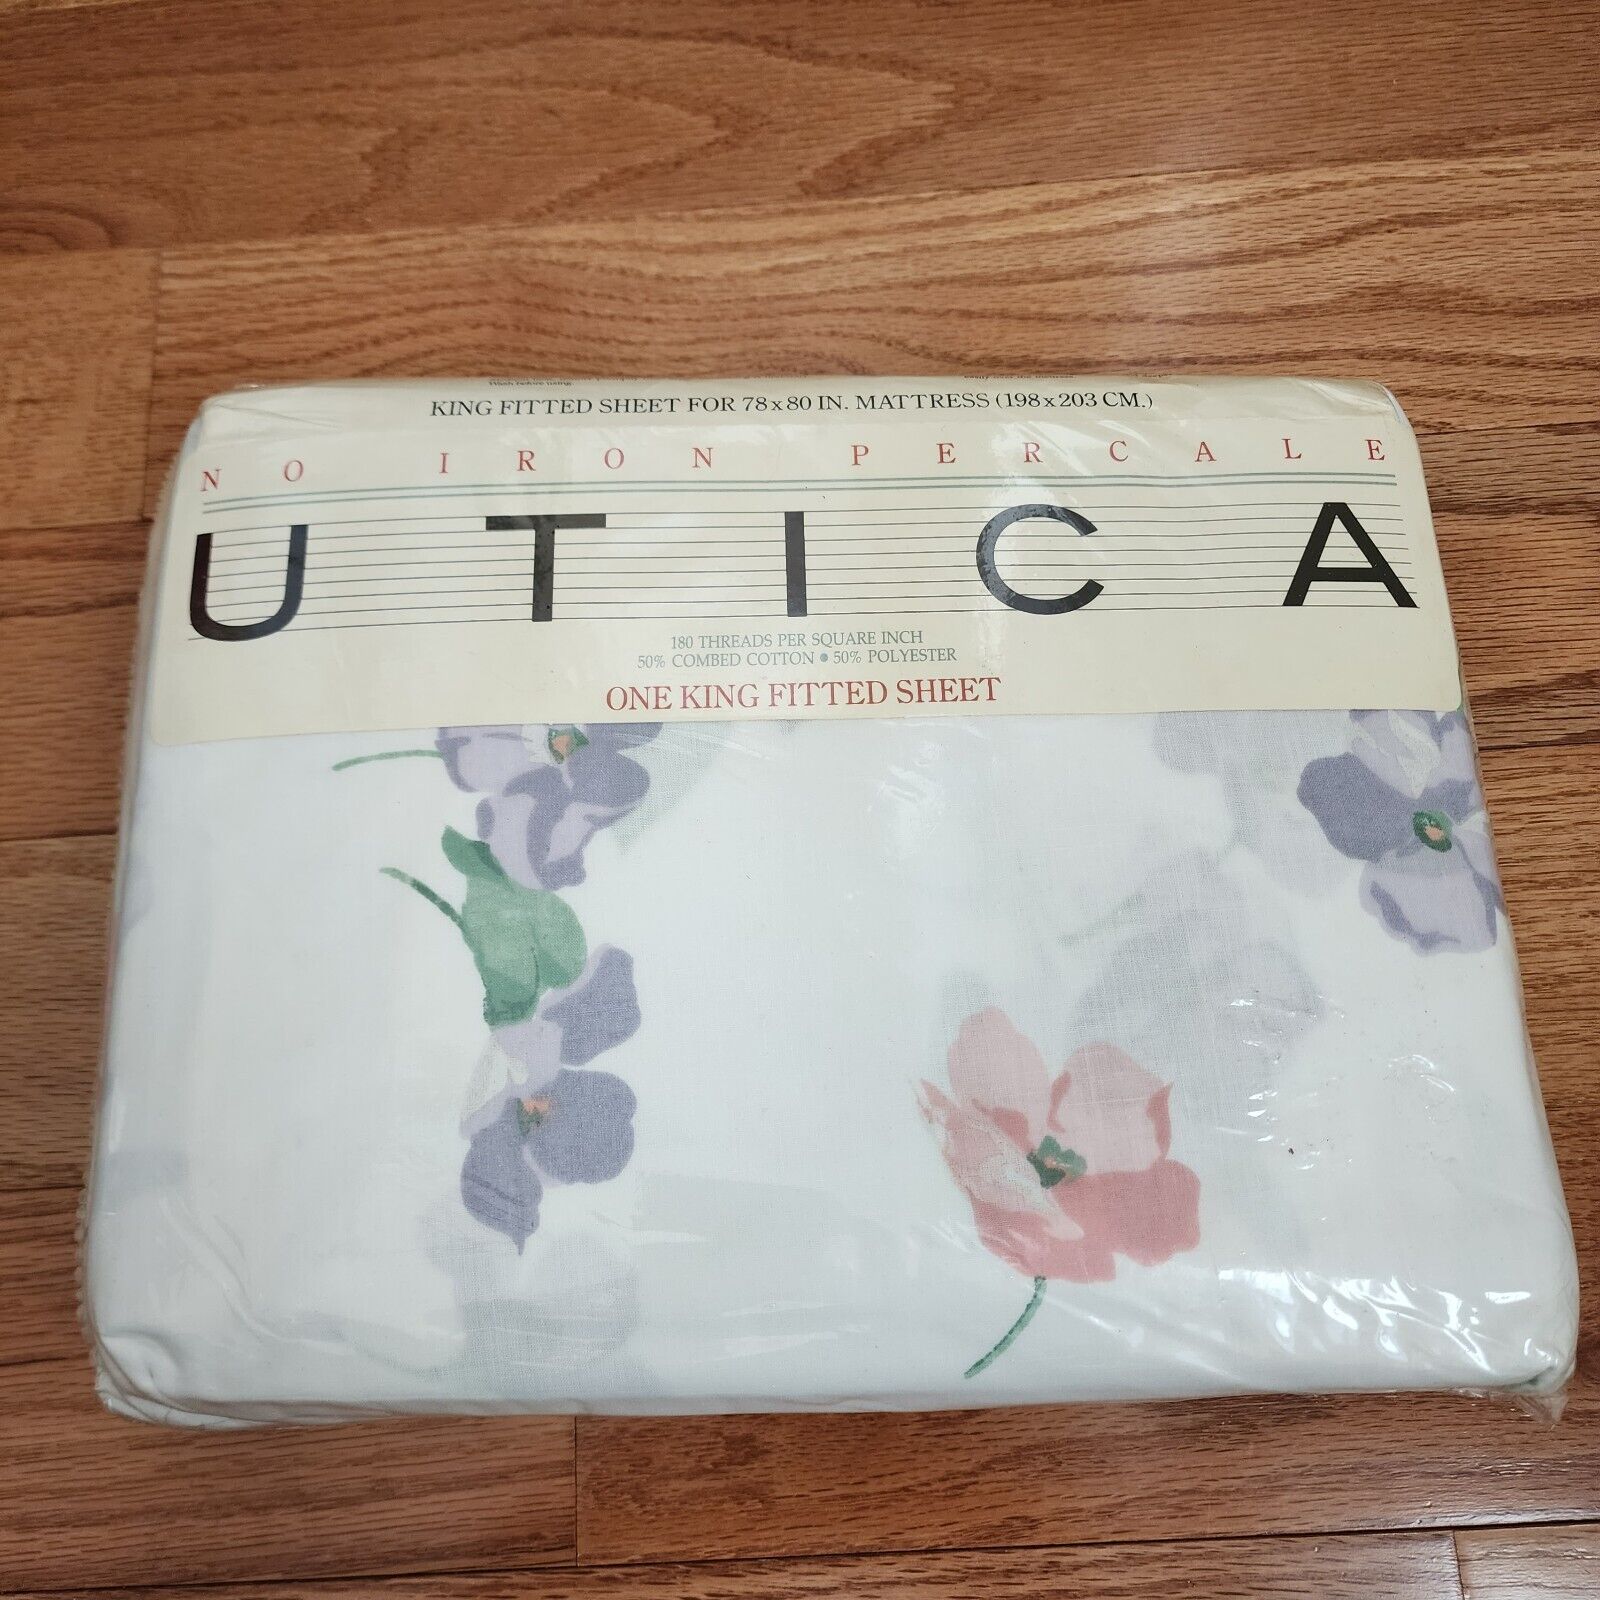 Vintage Utica King Fitted Sheet GARDEN HOUSE Floral Multicolor Percale USA New 